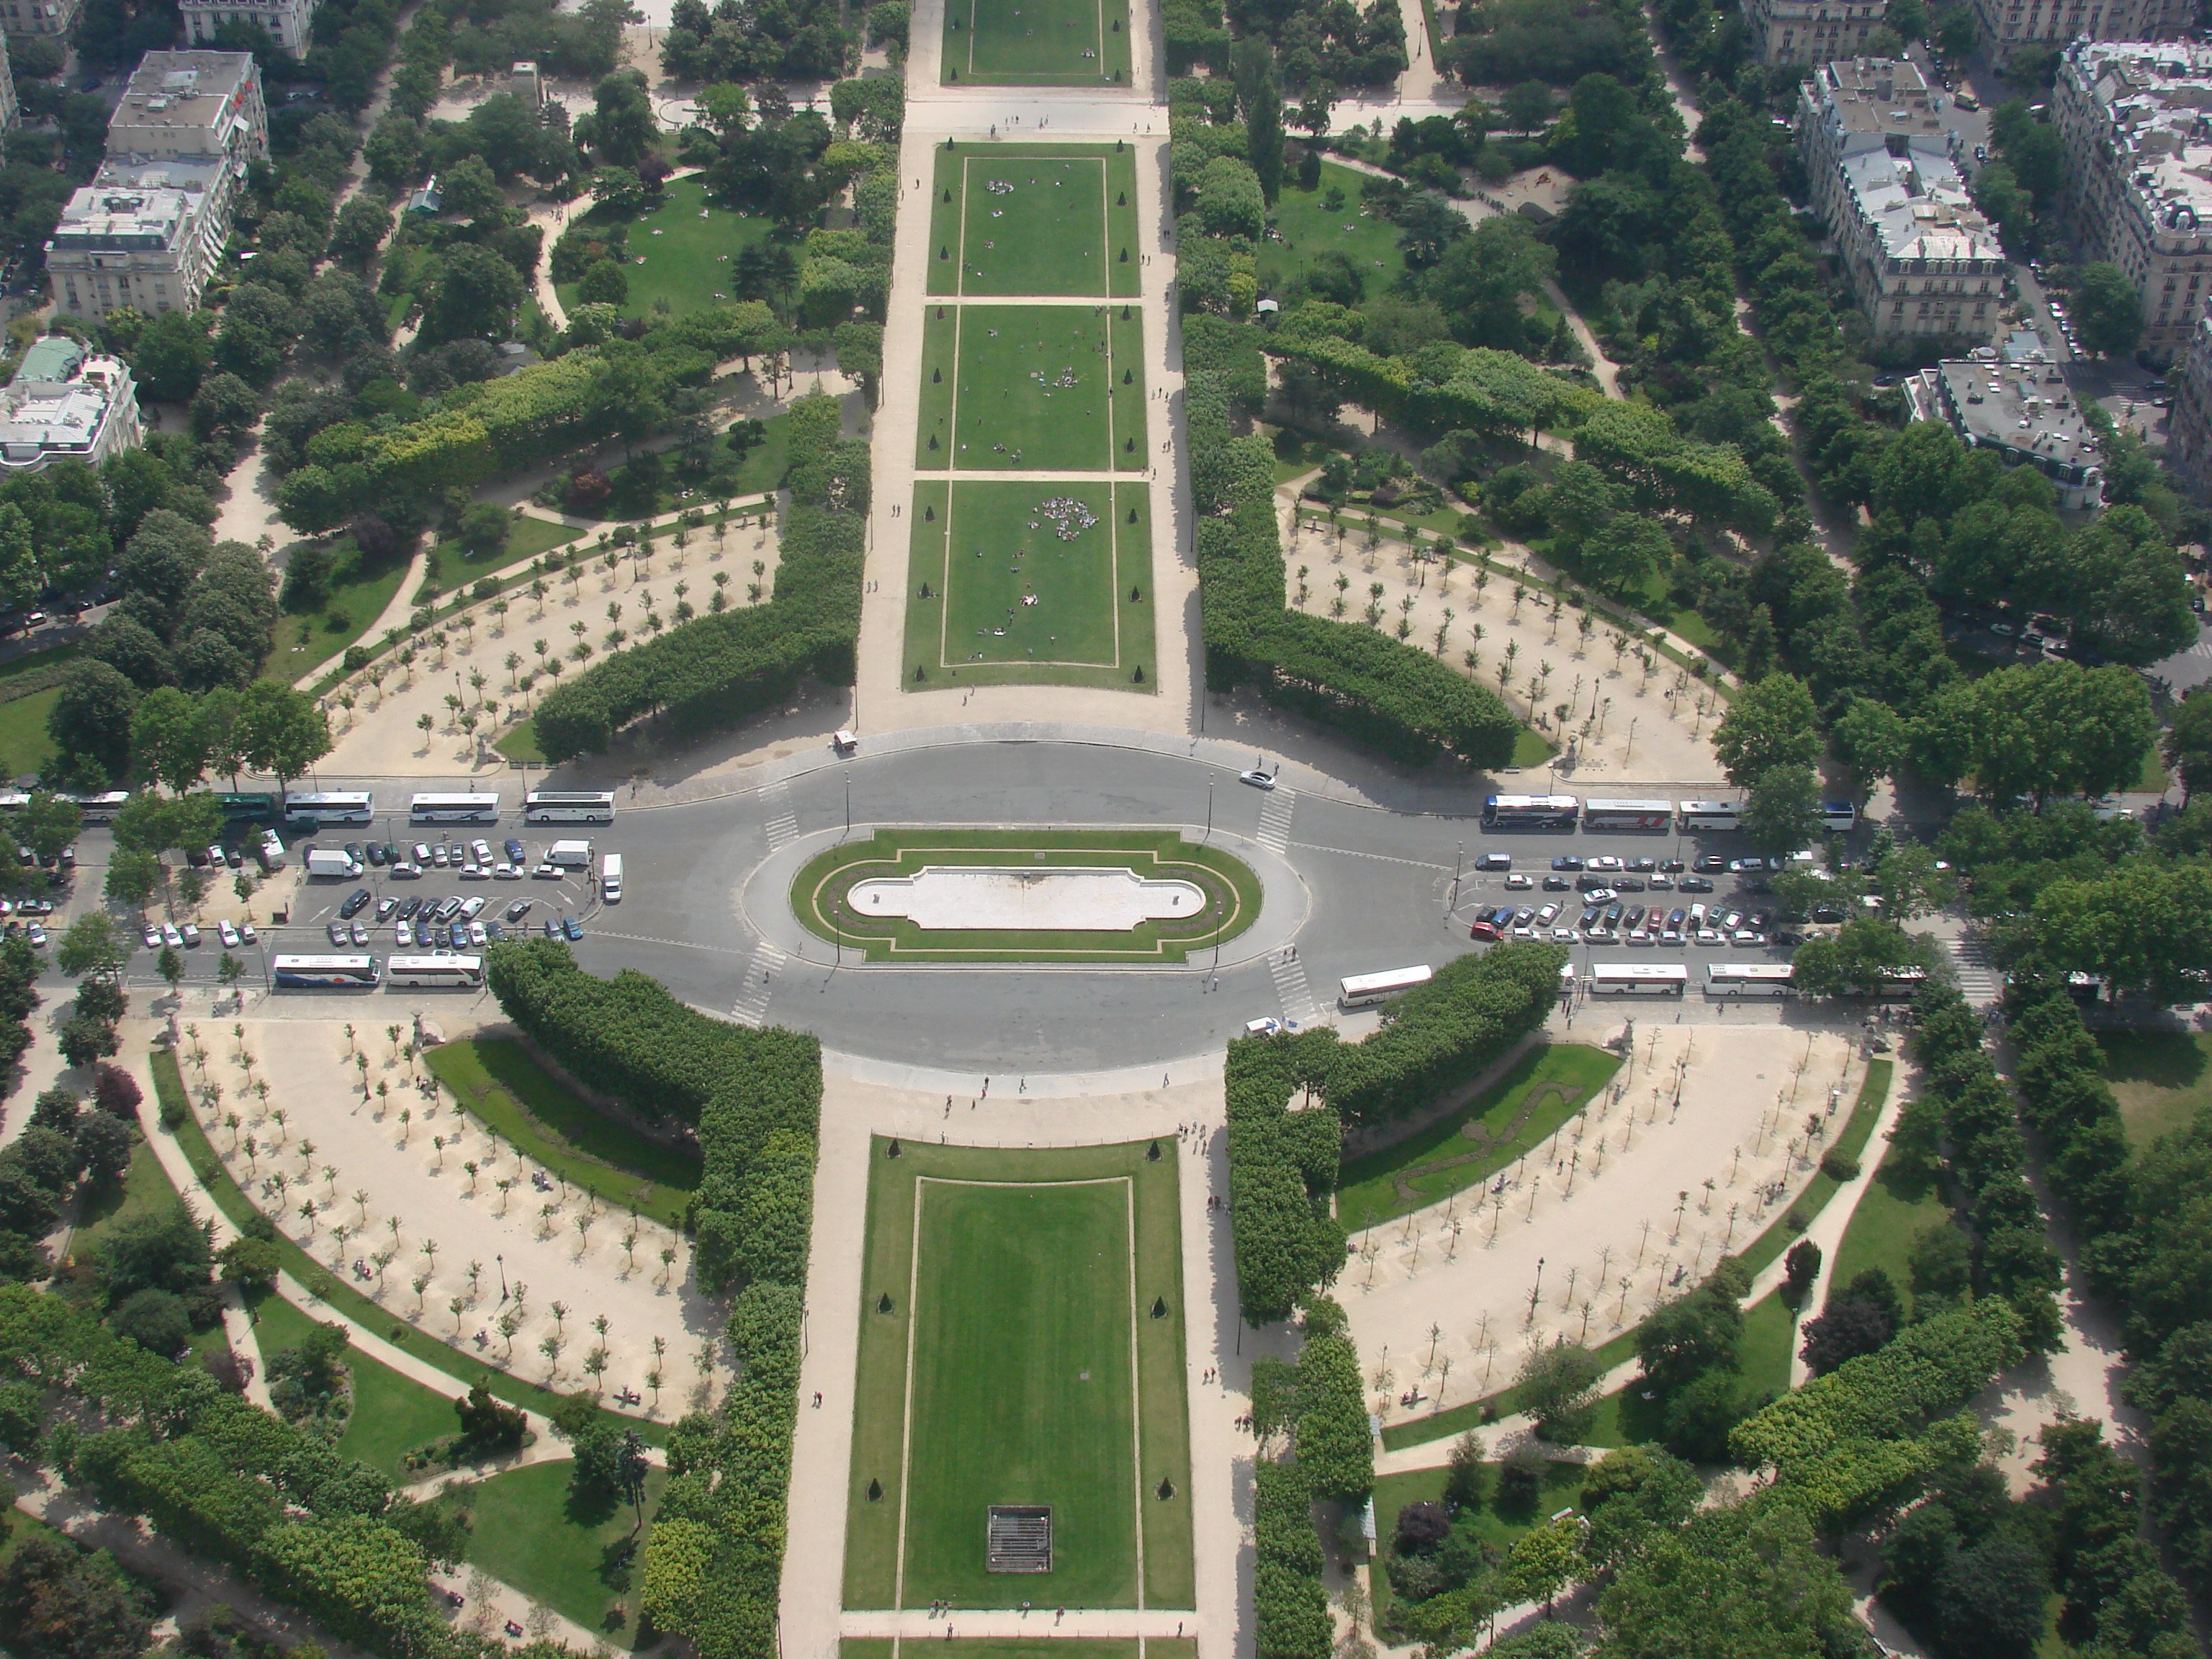 Champs de Mars - A peaceful park at the foot of the Eiffel Tower